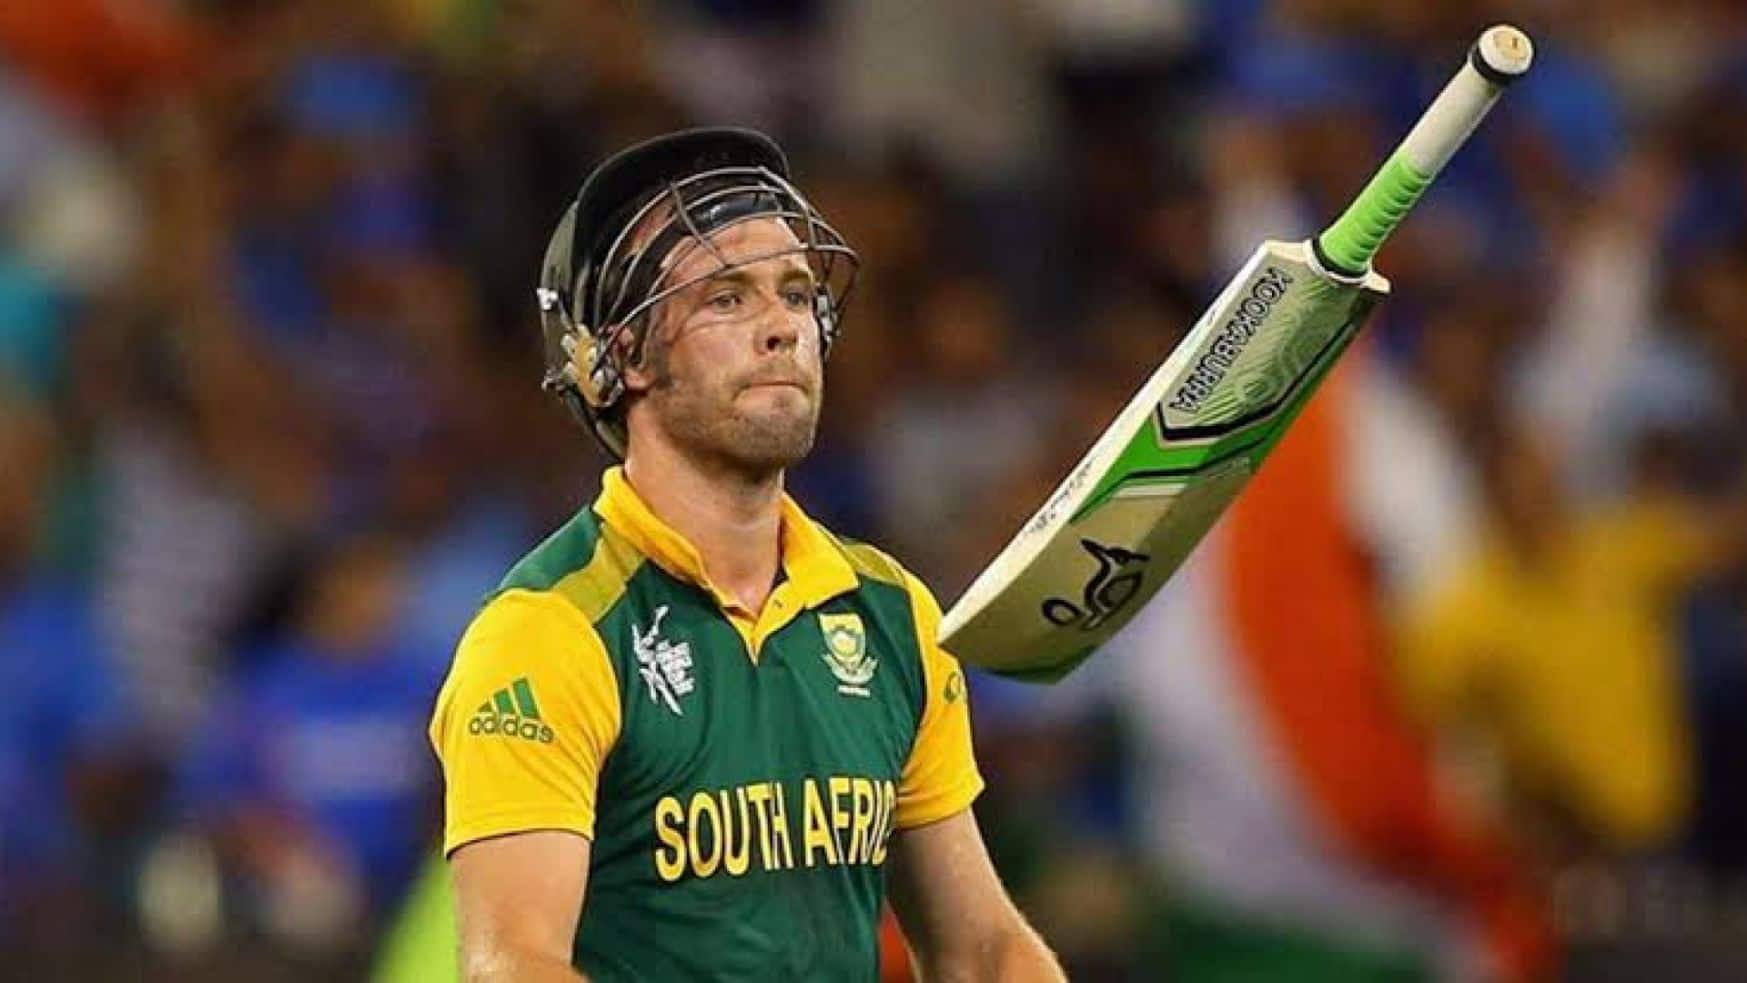 AB de Villiers Picks 'This' Pakistan Cricketer to Bowl For His Life?